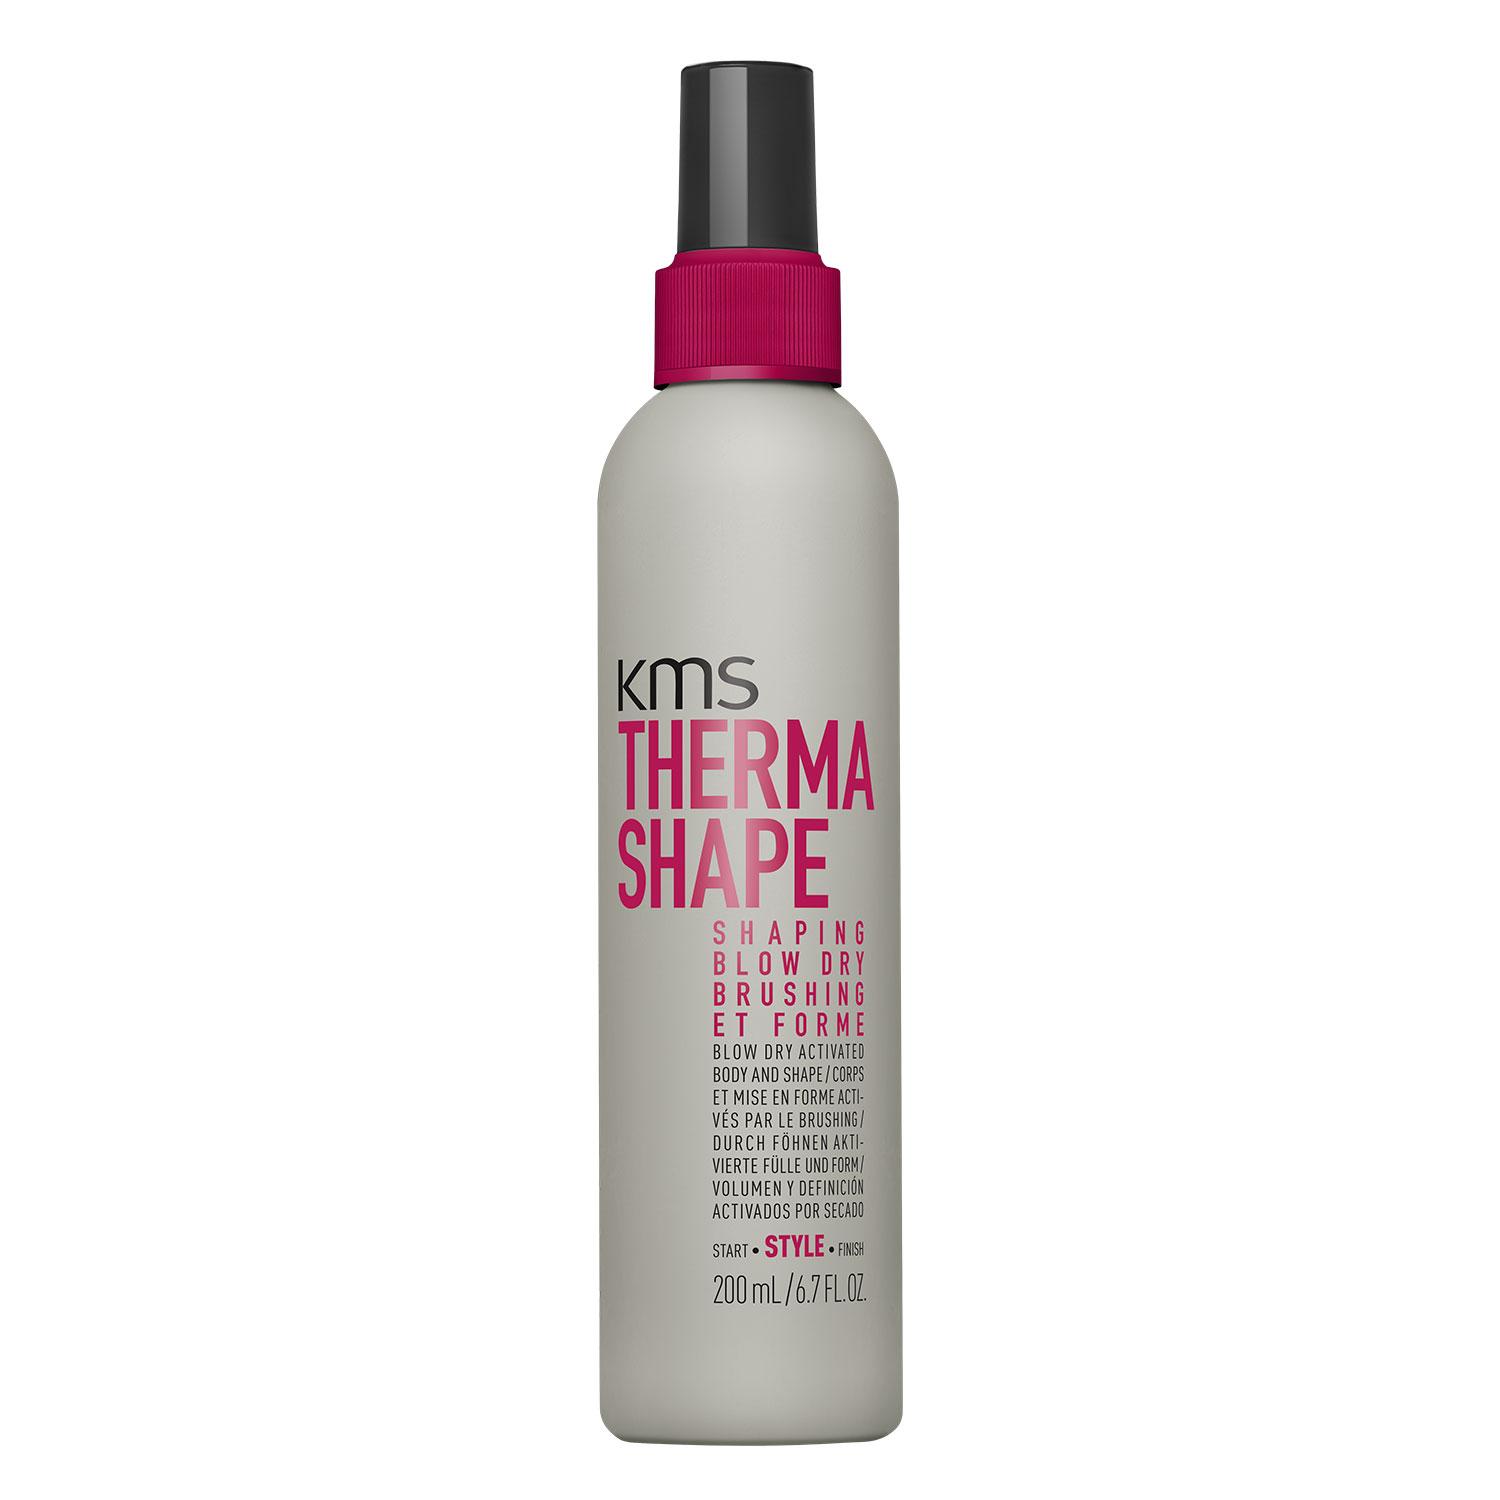 Thermashape - Shaping Blow Dry